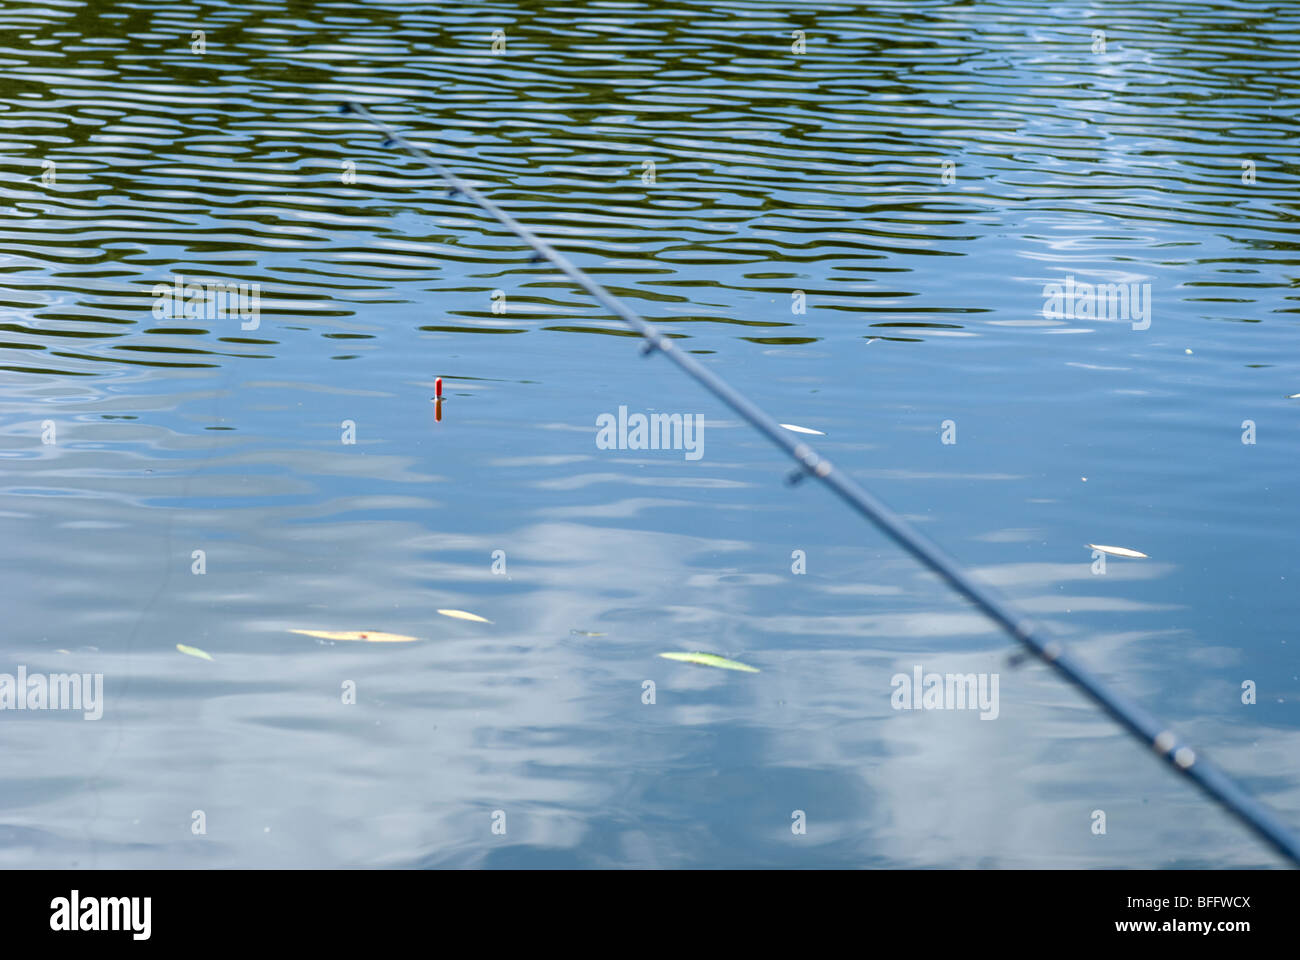 Fishing rod and float against blue rippled water Stock Photo